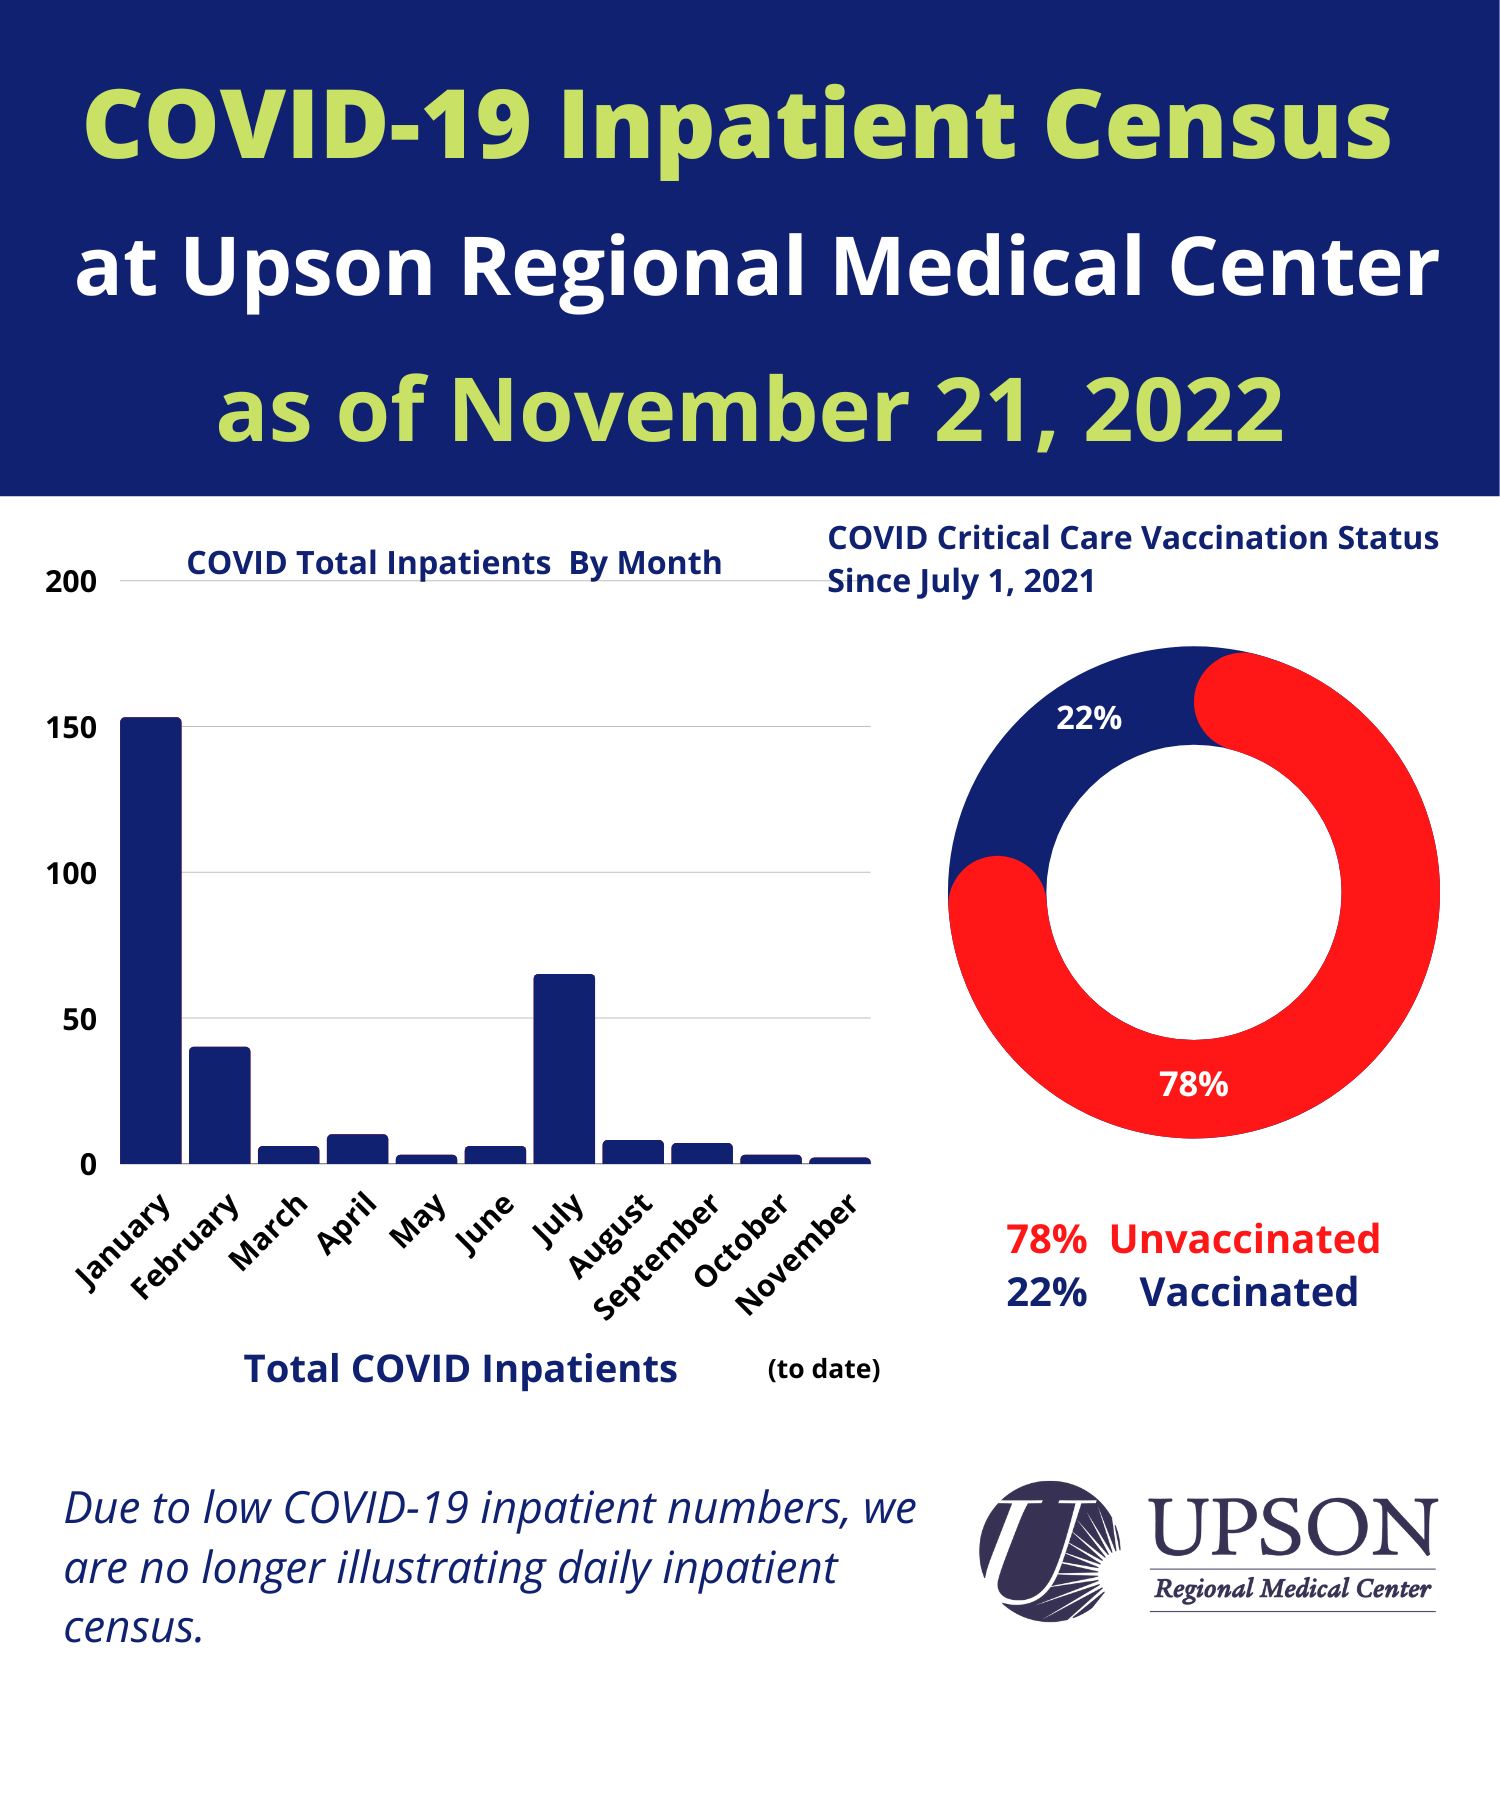 Photo for URMC COVID-19 inpatient status as of November 21, 2022.